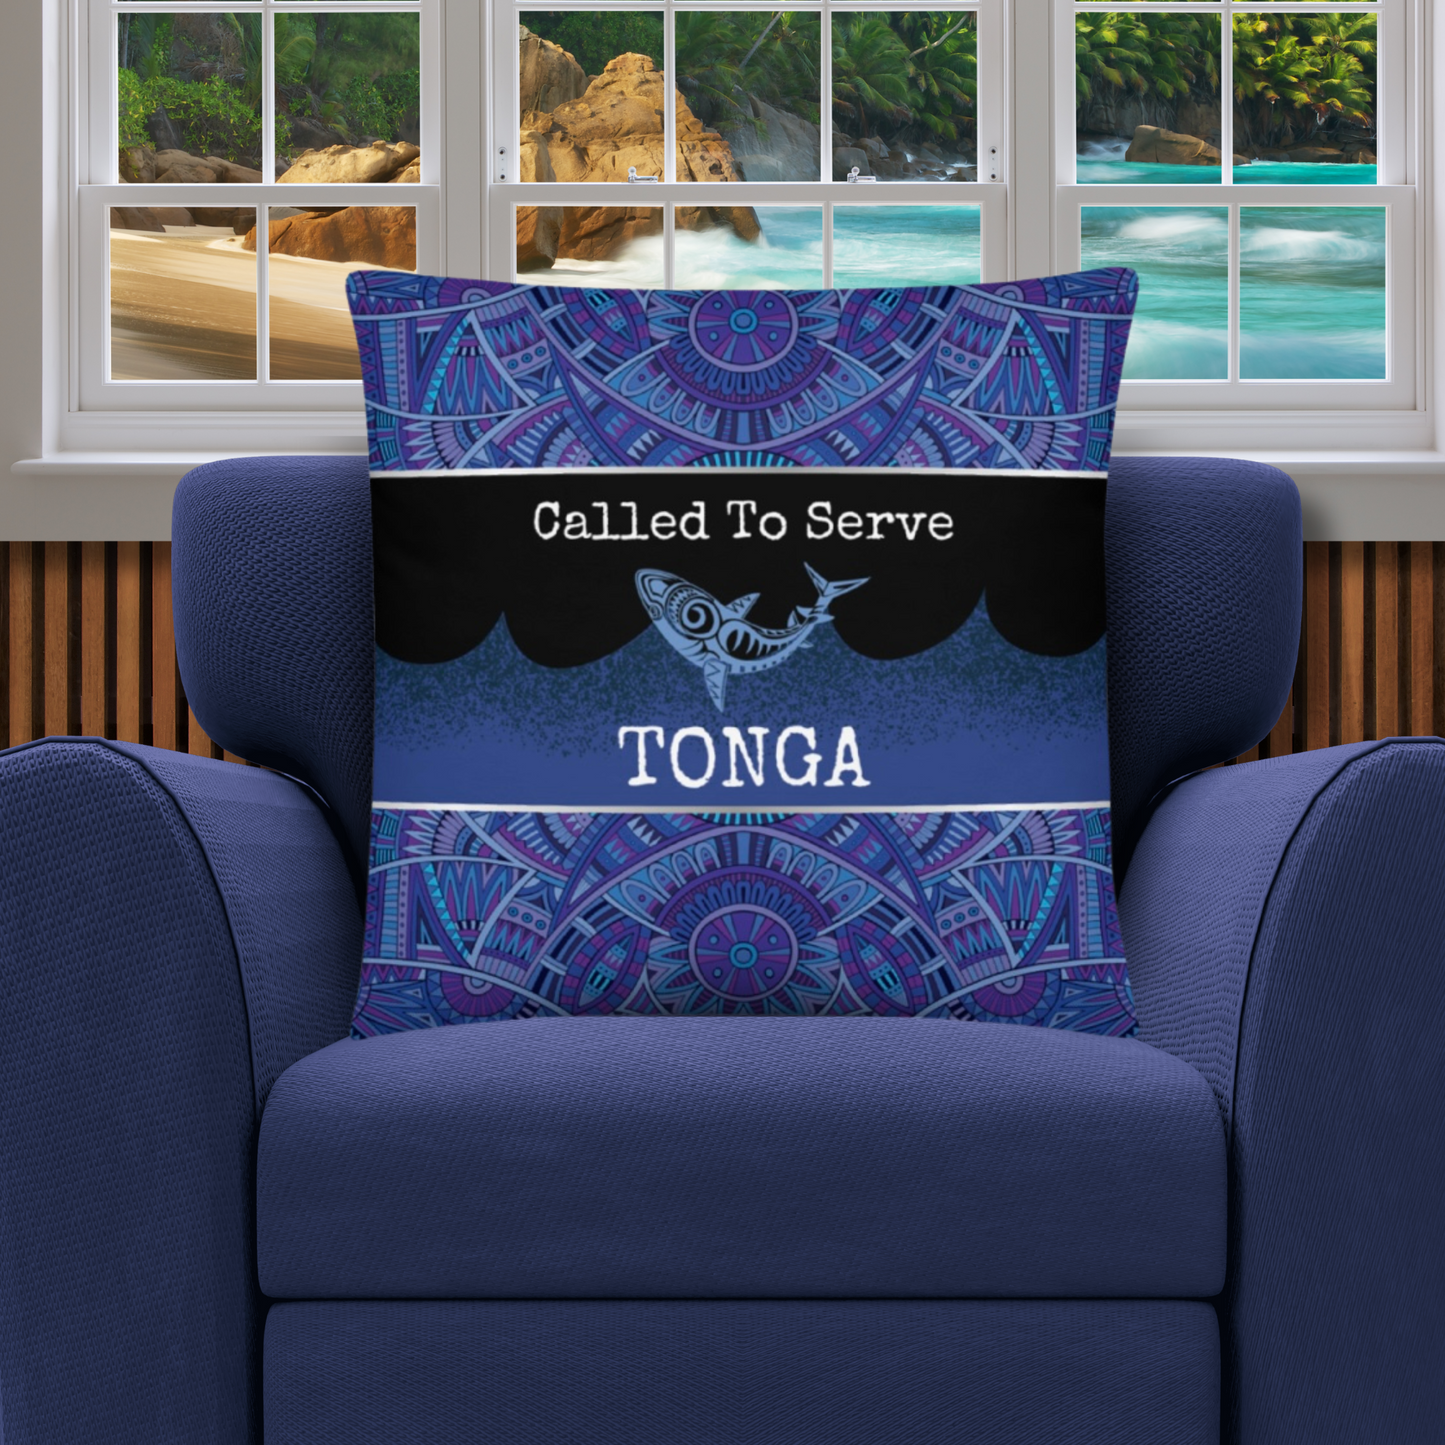 Tonga Missionary Gift | Best Missionary Gift Ideas | Mission Call Gifts | Called to Serve Gifts | Missionary Mom Gifts | Best Latter Day Saint Gifts | LDS Missionary Gifts | Tonga Home Decor